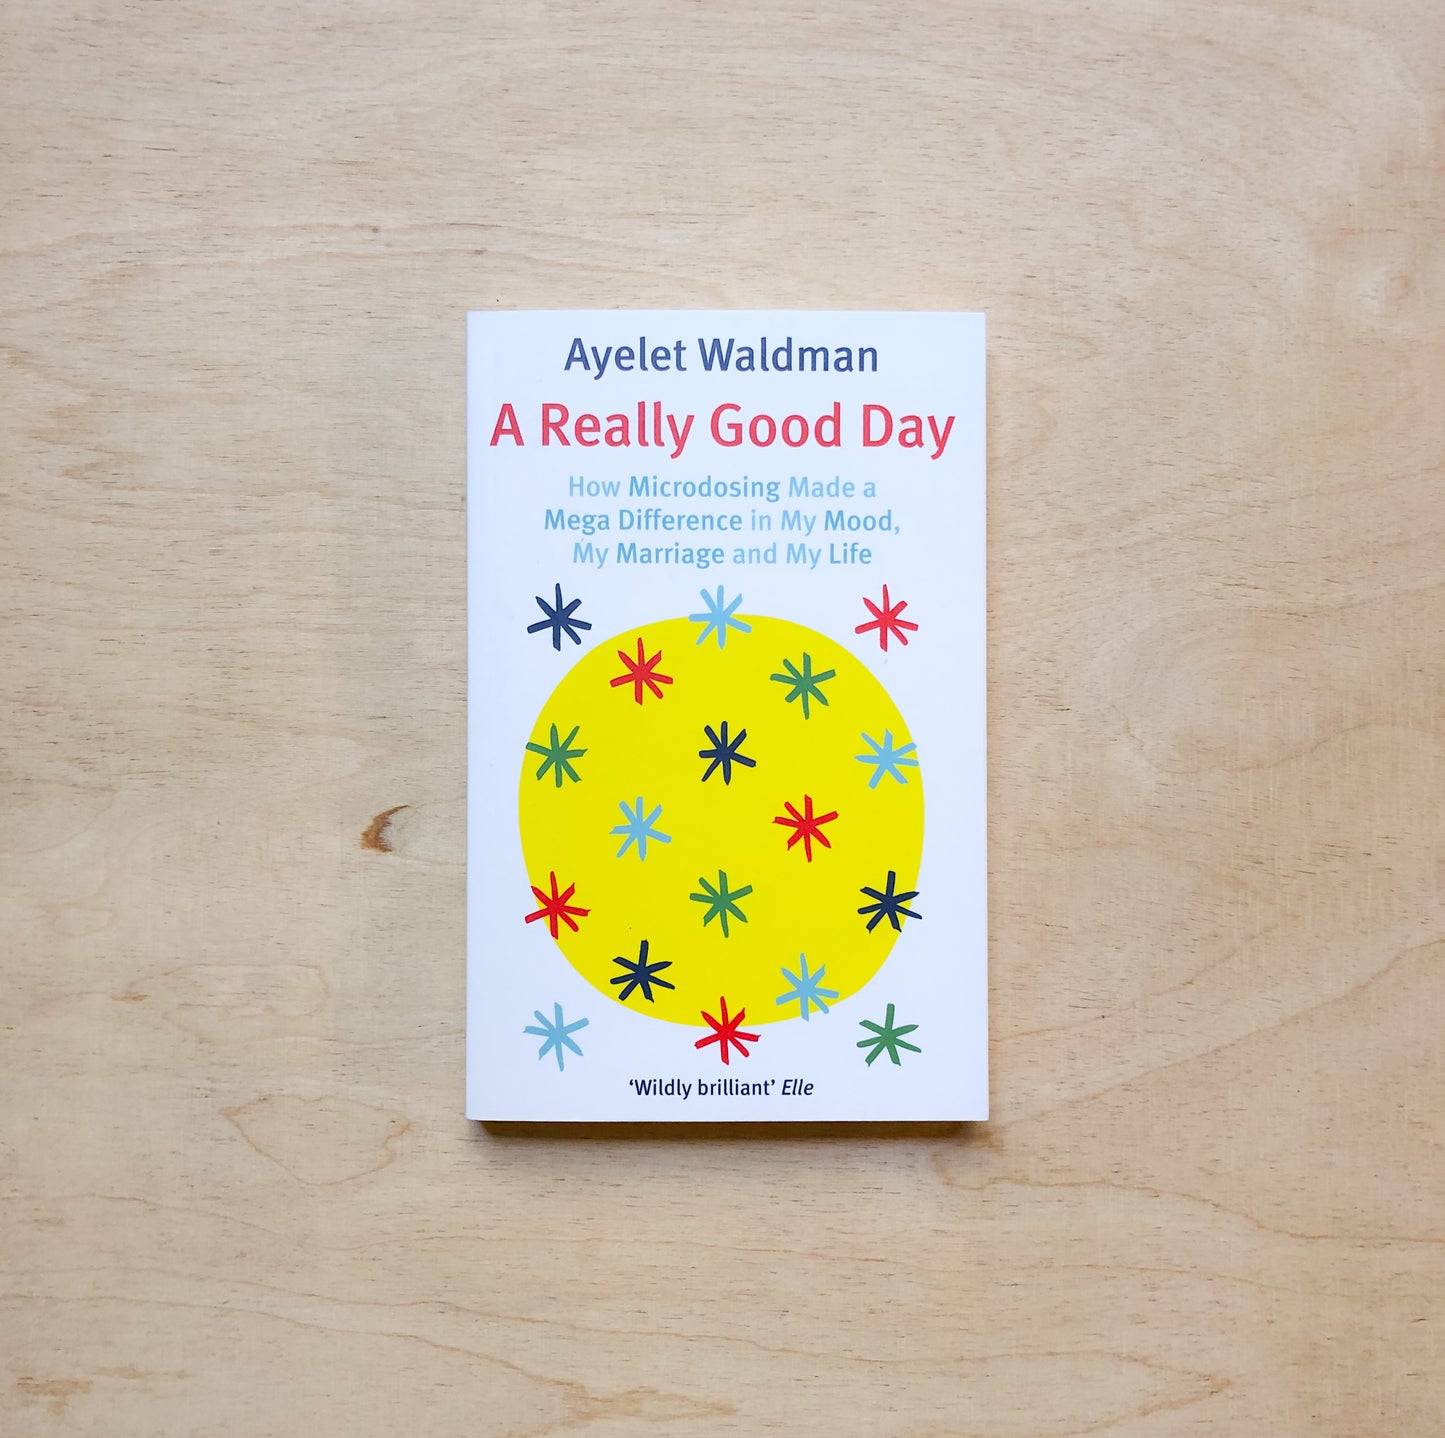 A Really Good Day - How Microdosing Made a Mega Difference in My Mood, My Marriage and My Life